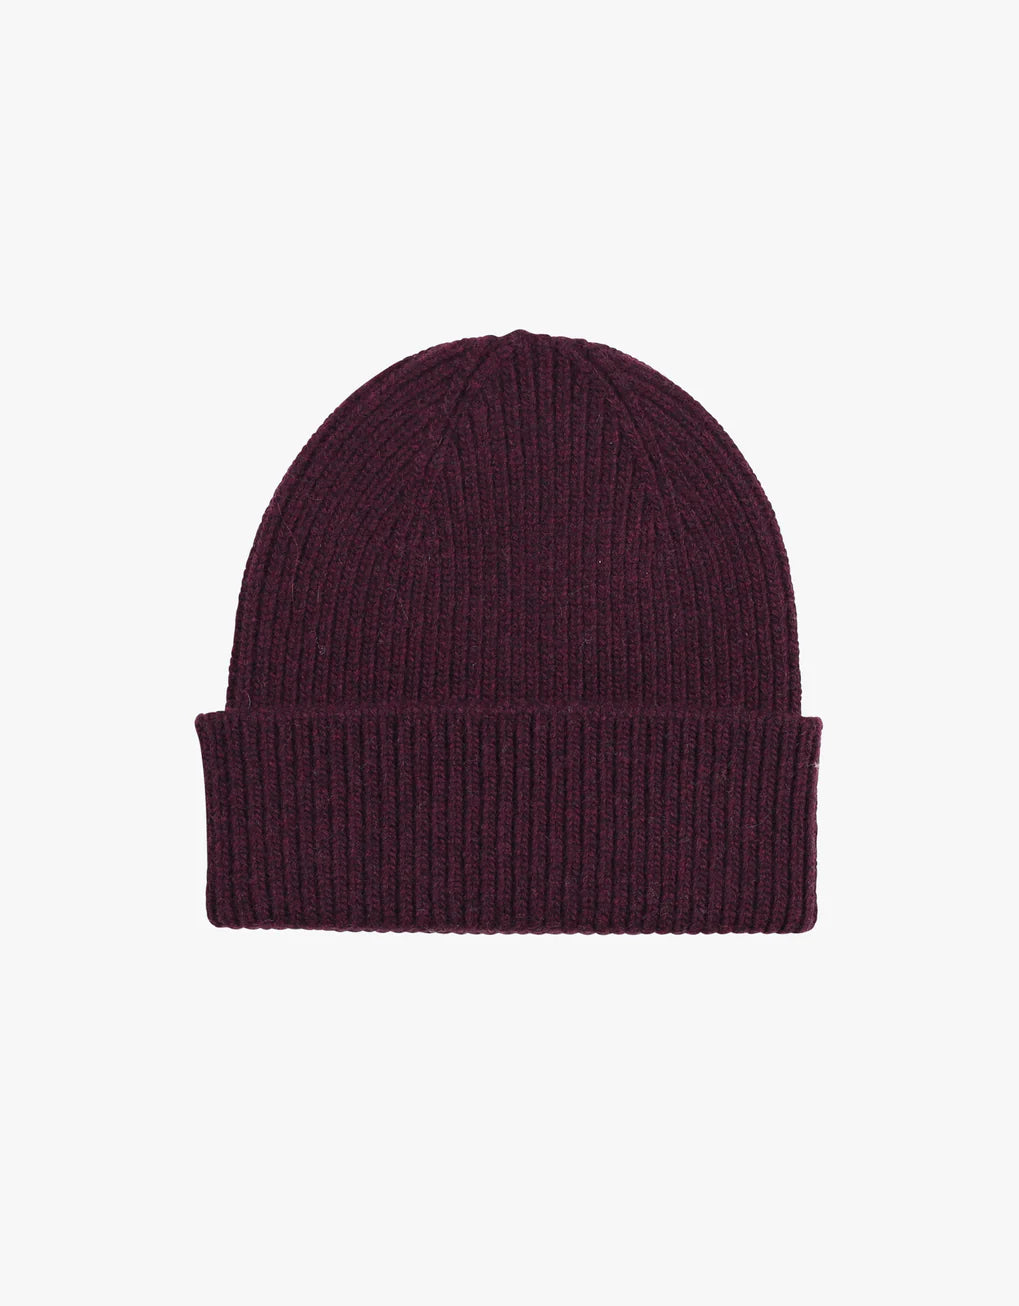 A Colorful Standard Merino Wool Beanie on a white background, perfect for the season.